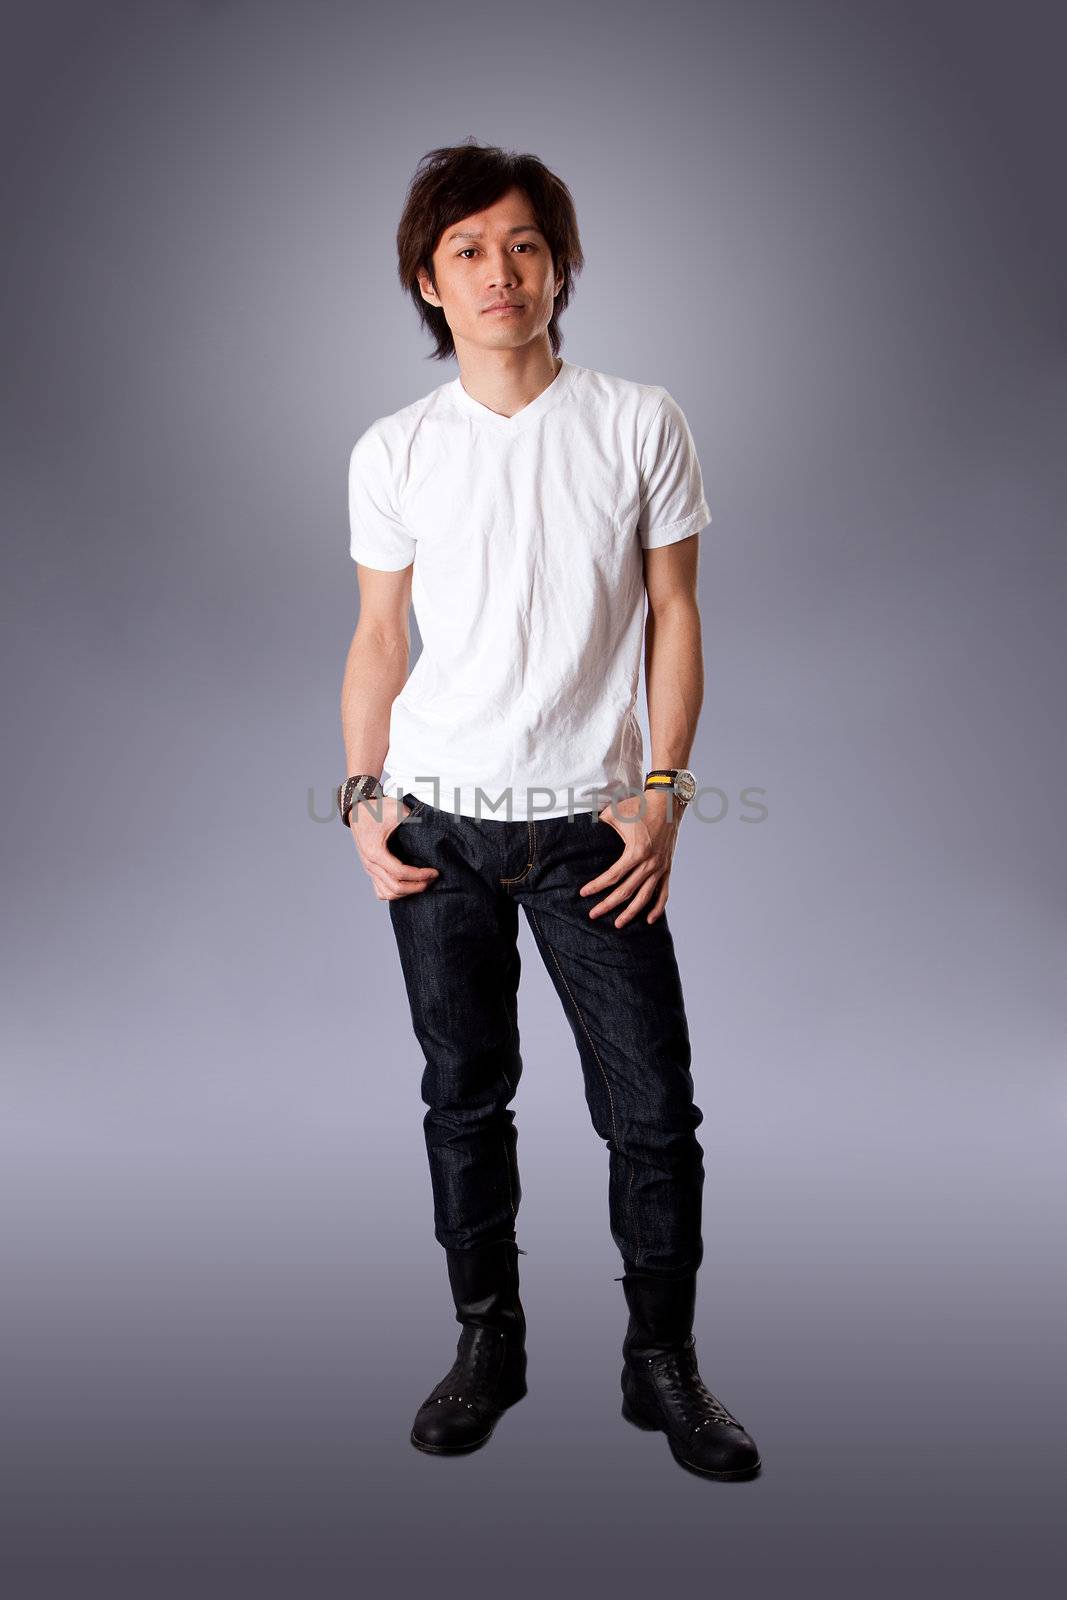 Casual Asian man wearing white shirt and jeans standing, isolated.